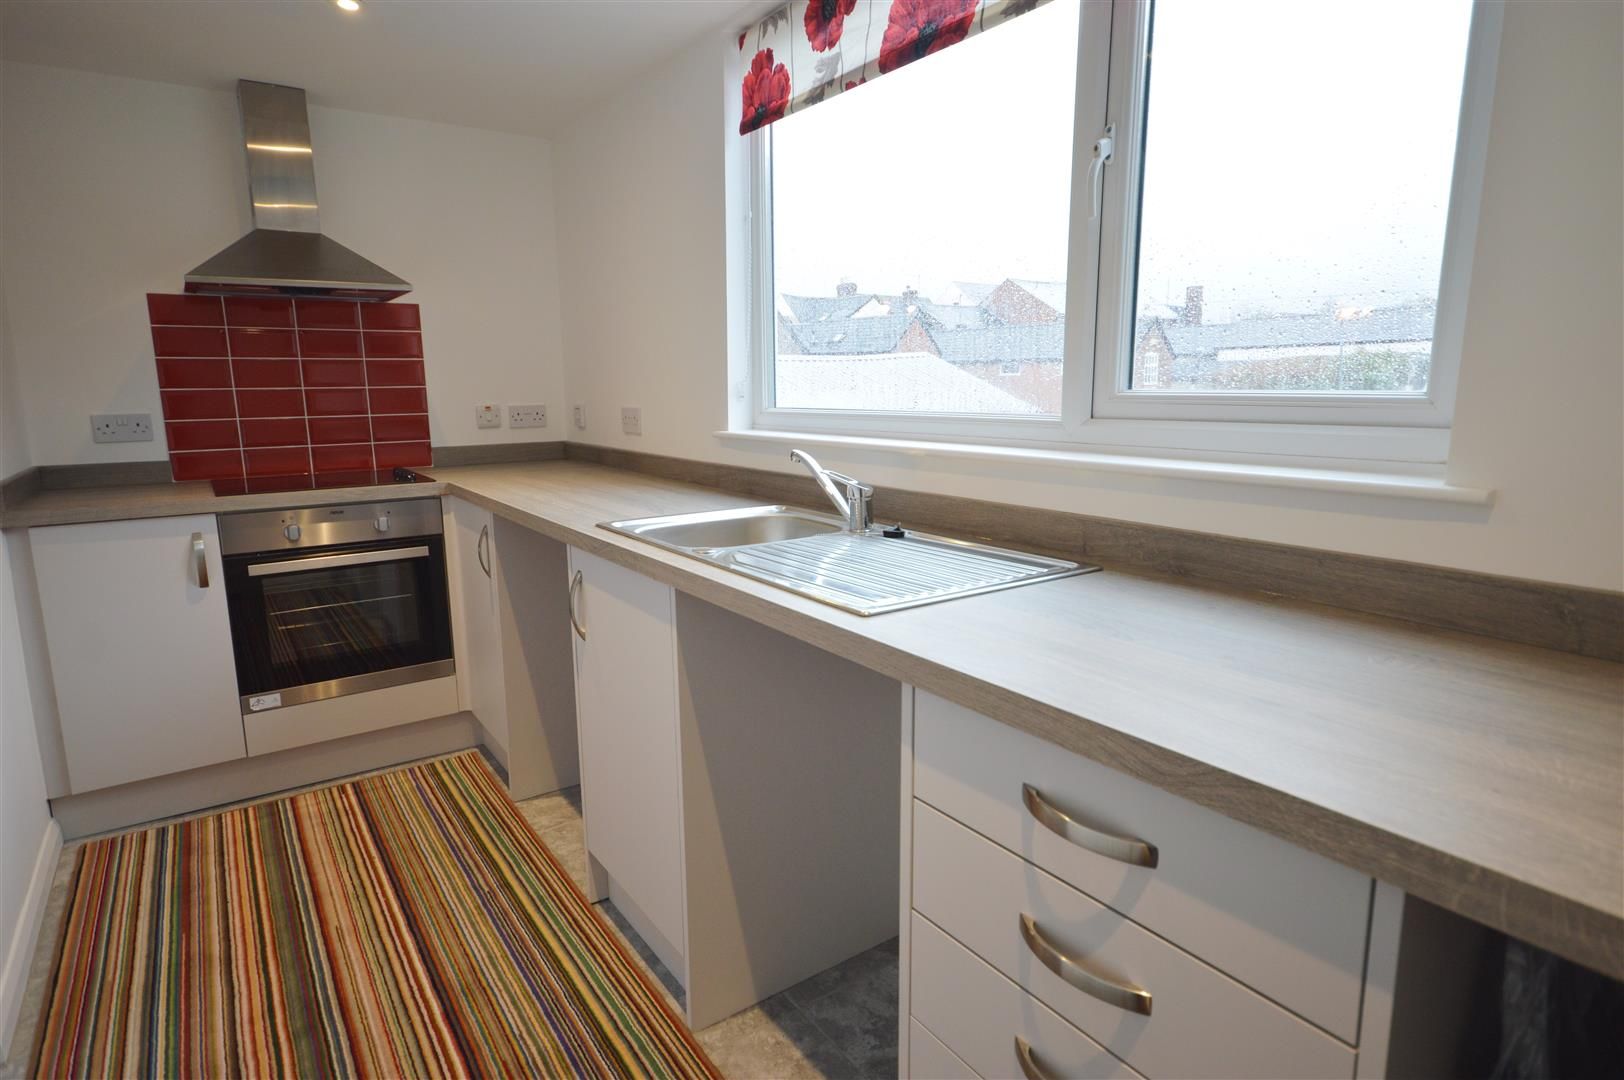 1 bed flat to rent in Leominster  - Property Image 1